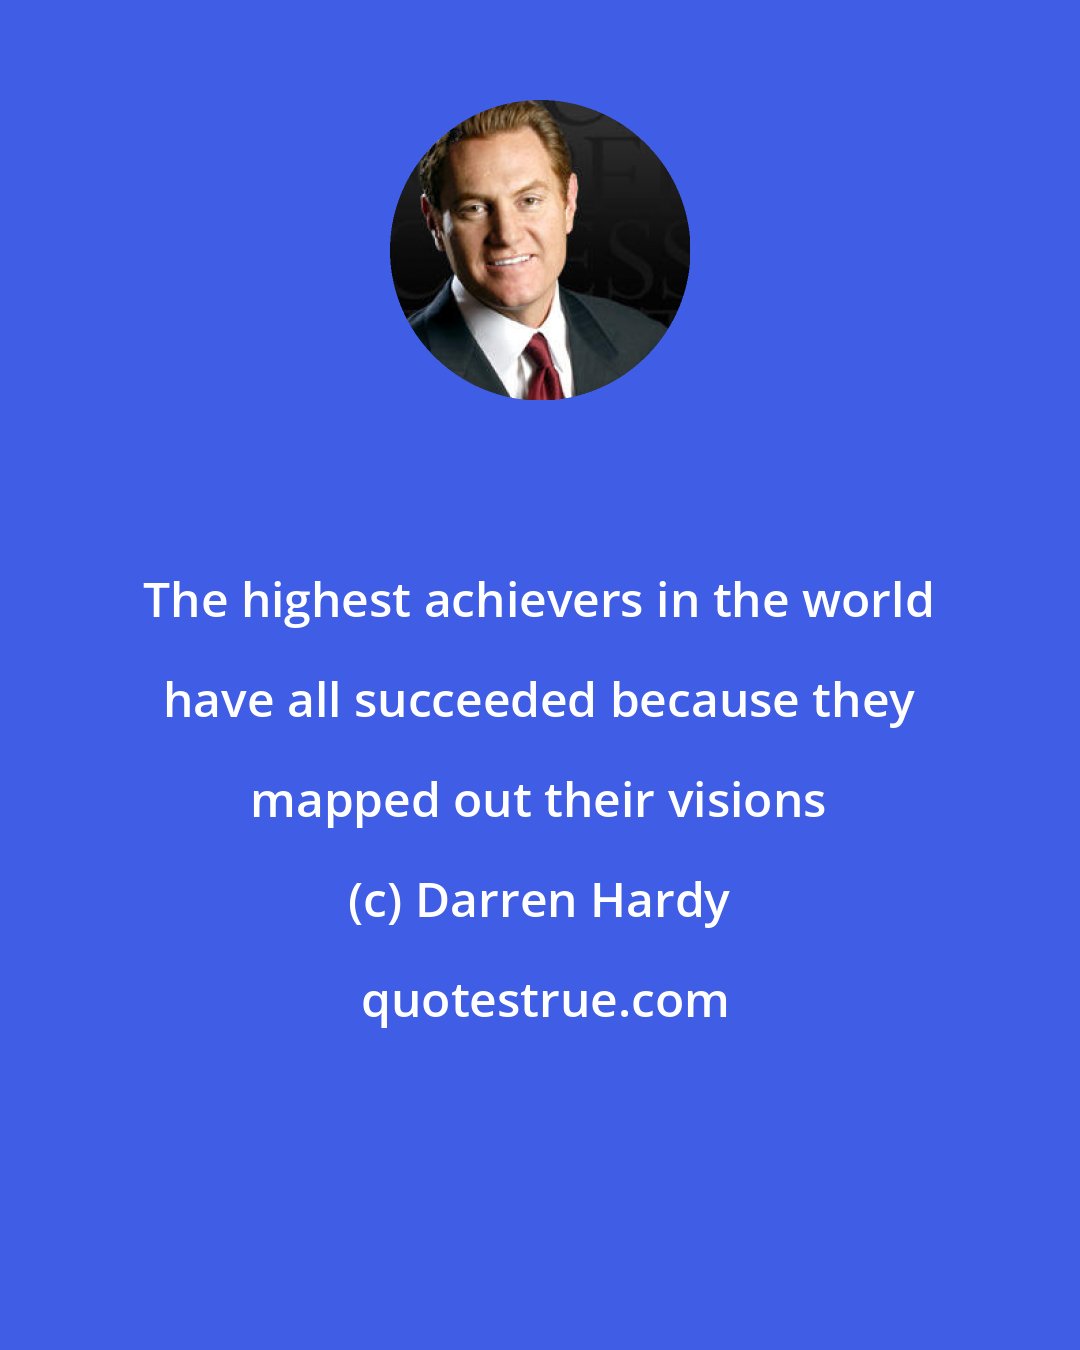 Darren Hardy: The highest achievers in the world have all succeeded because they mapped out their visions